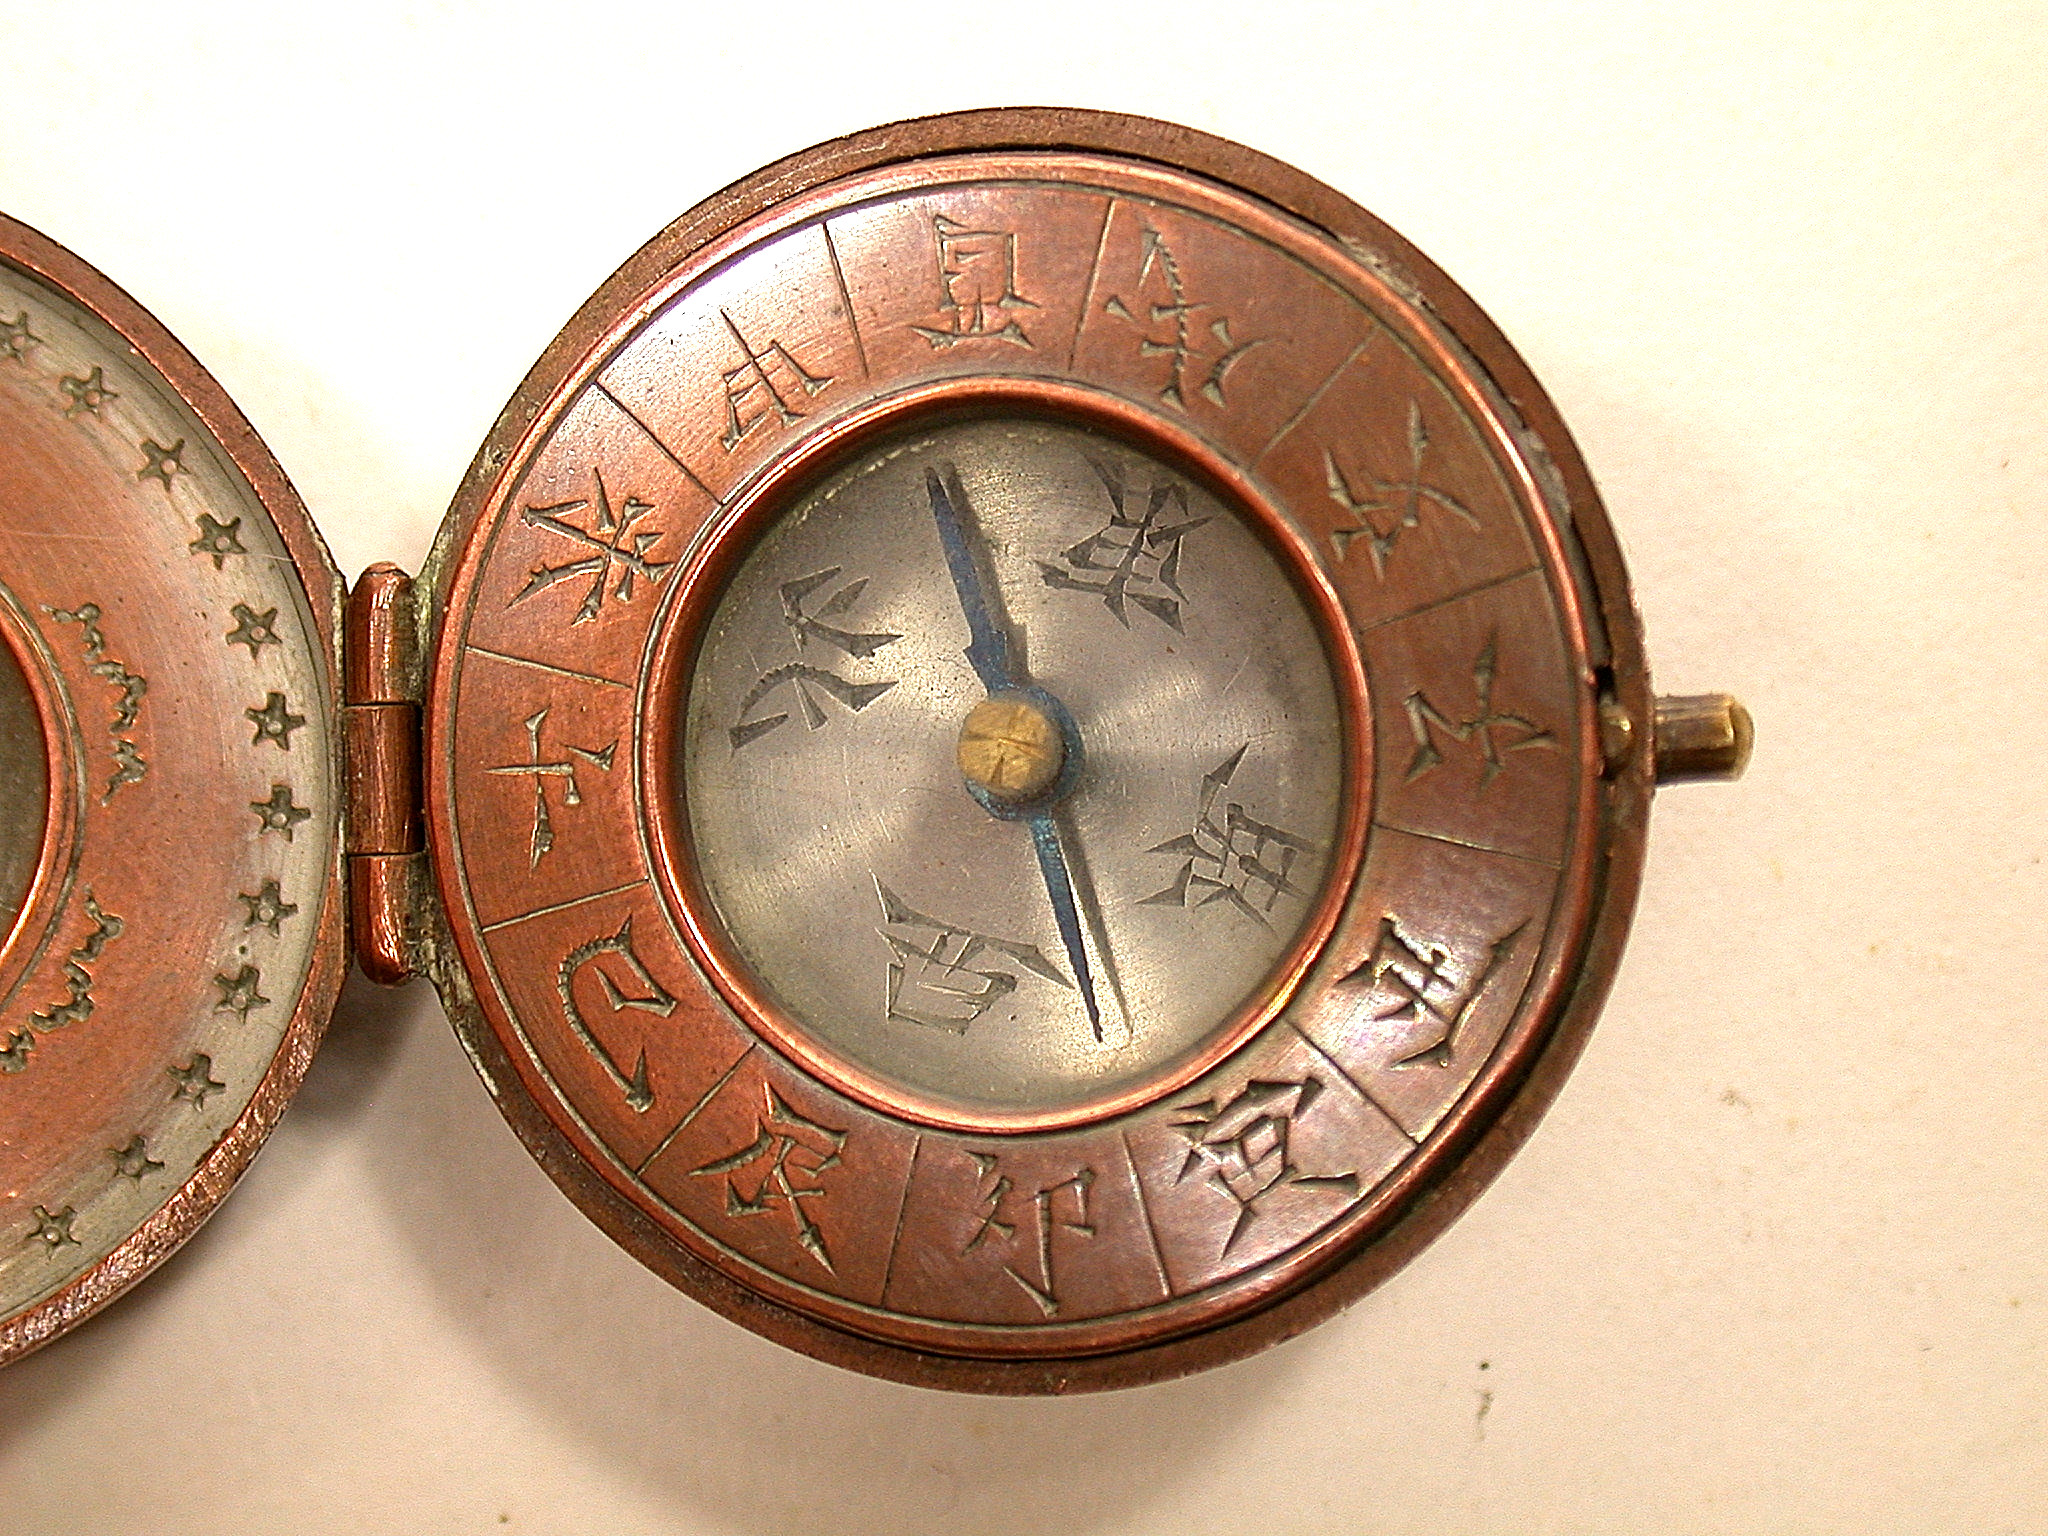 Collectible Japanese Scaphe Dial and Compass late 19th Century. - Fleaglass